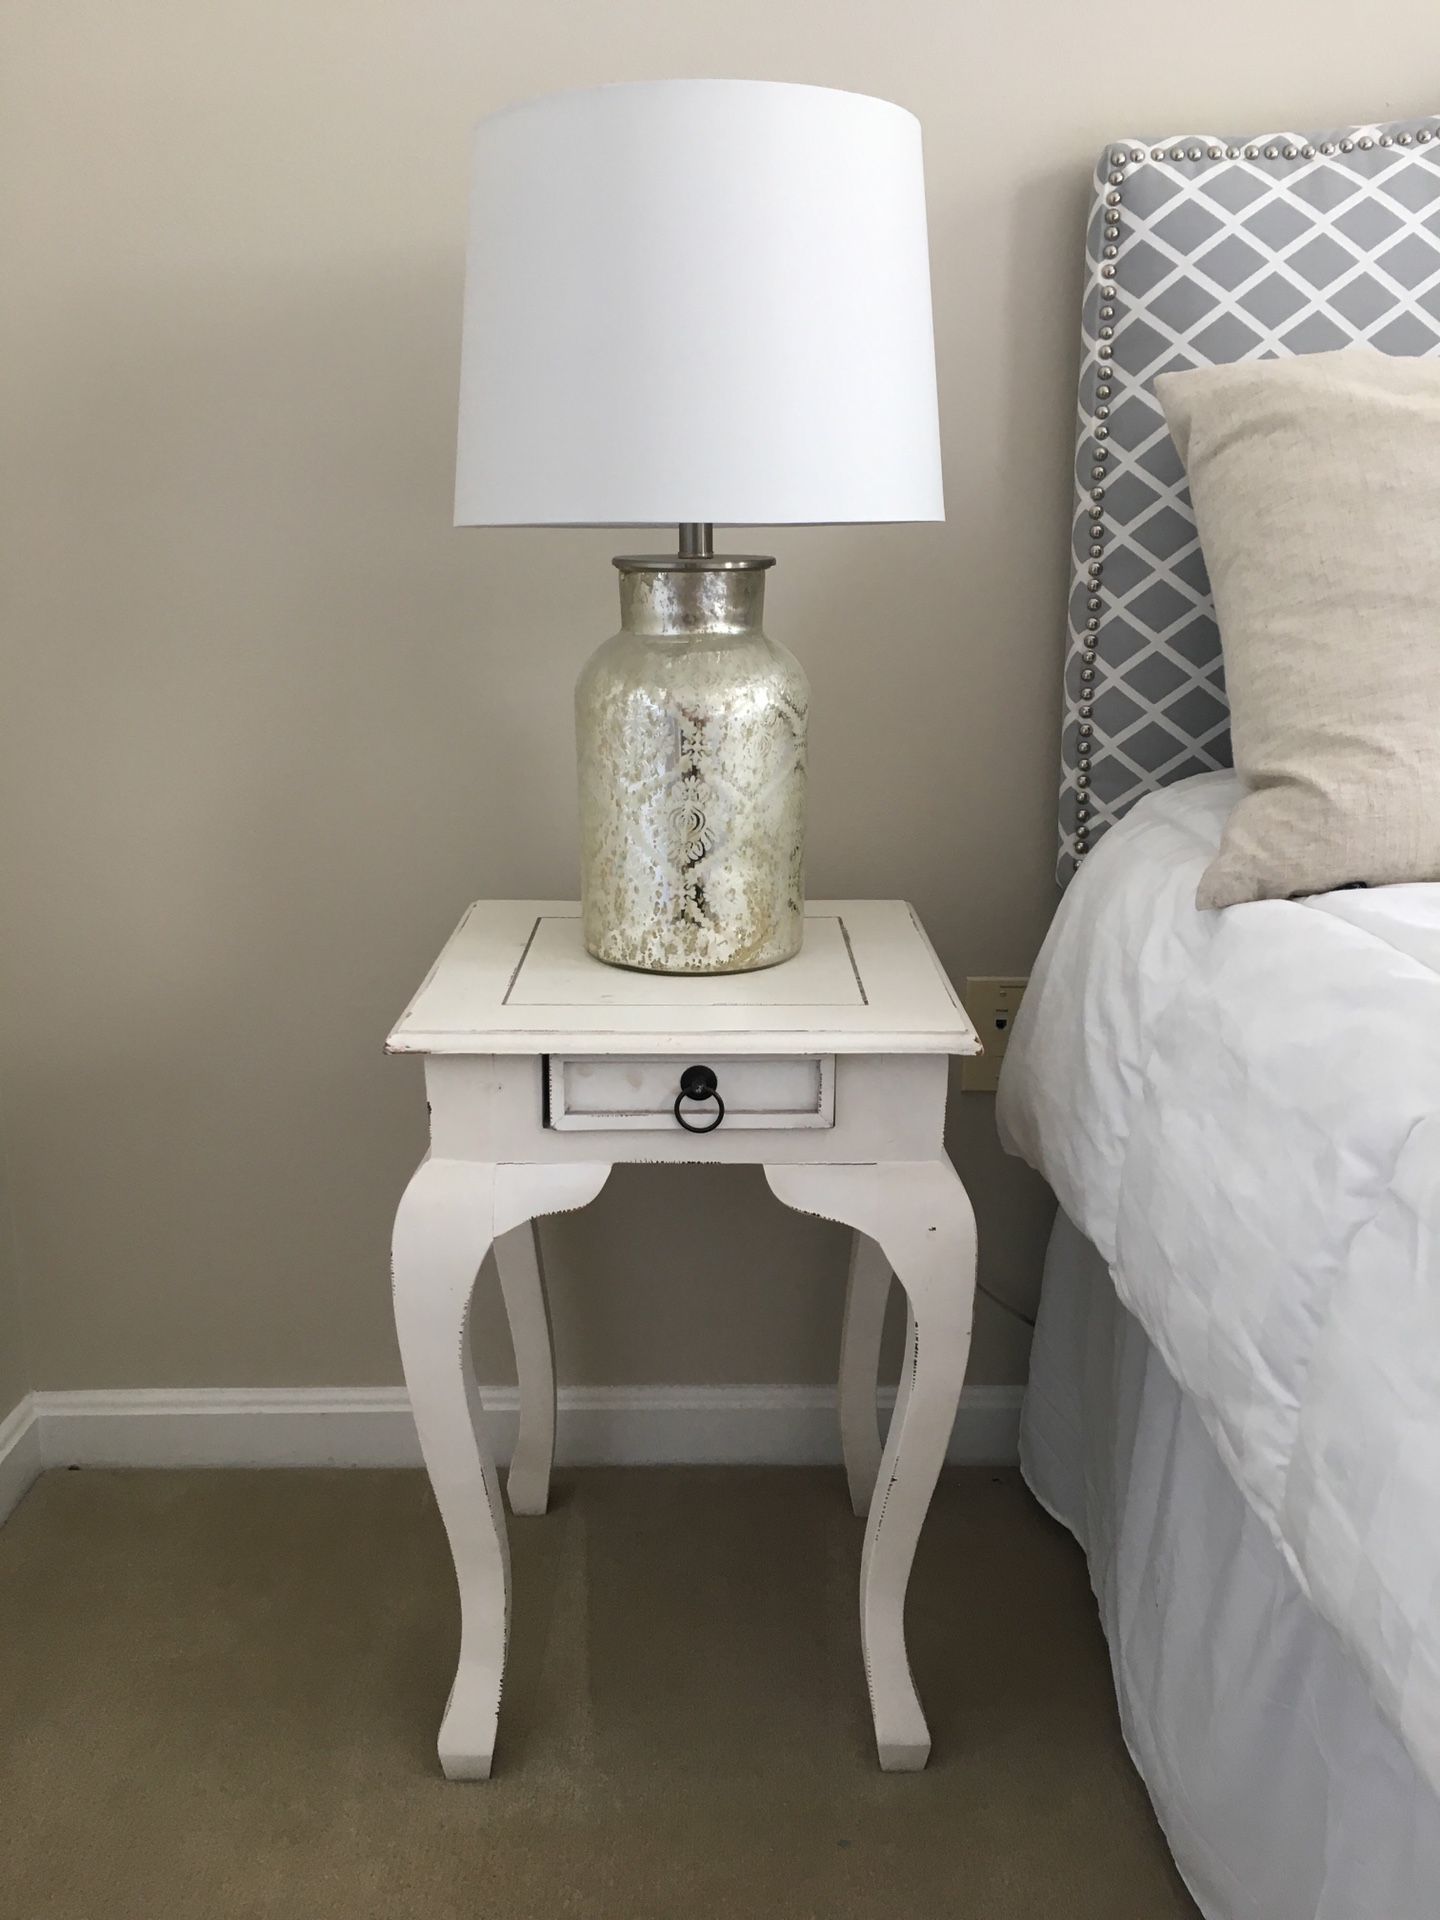 Set of two white nightstands